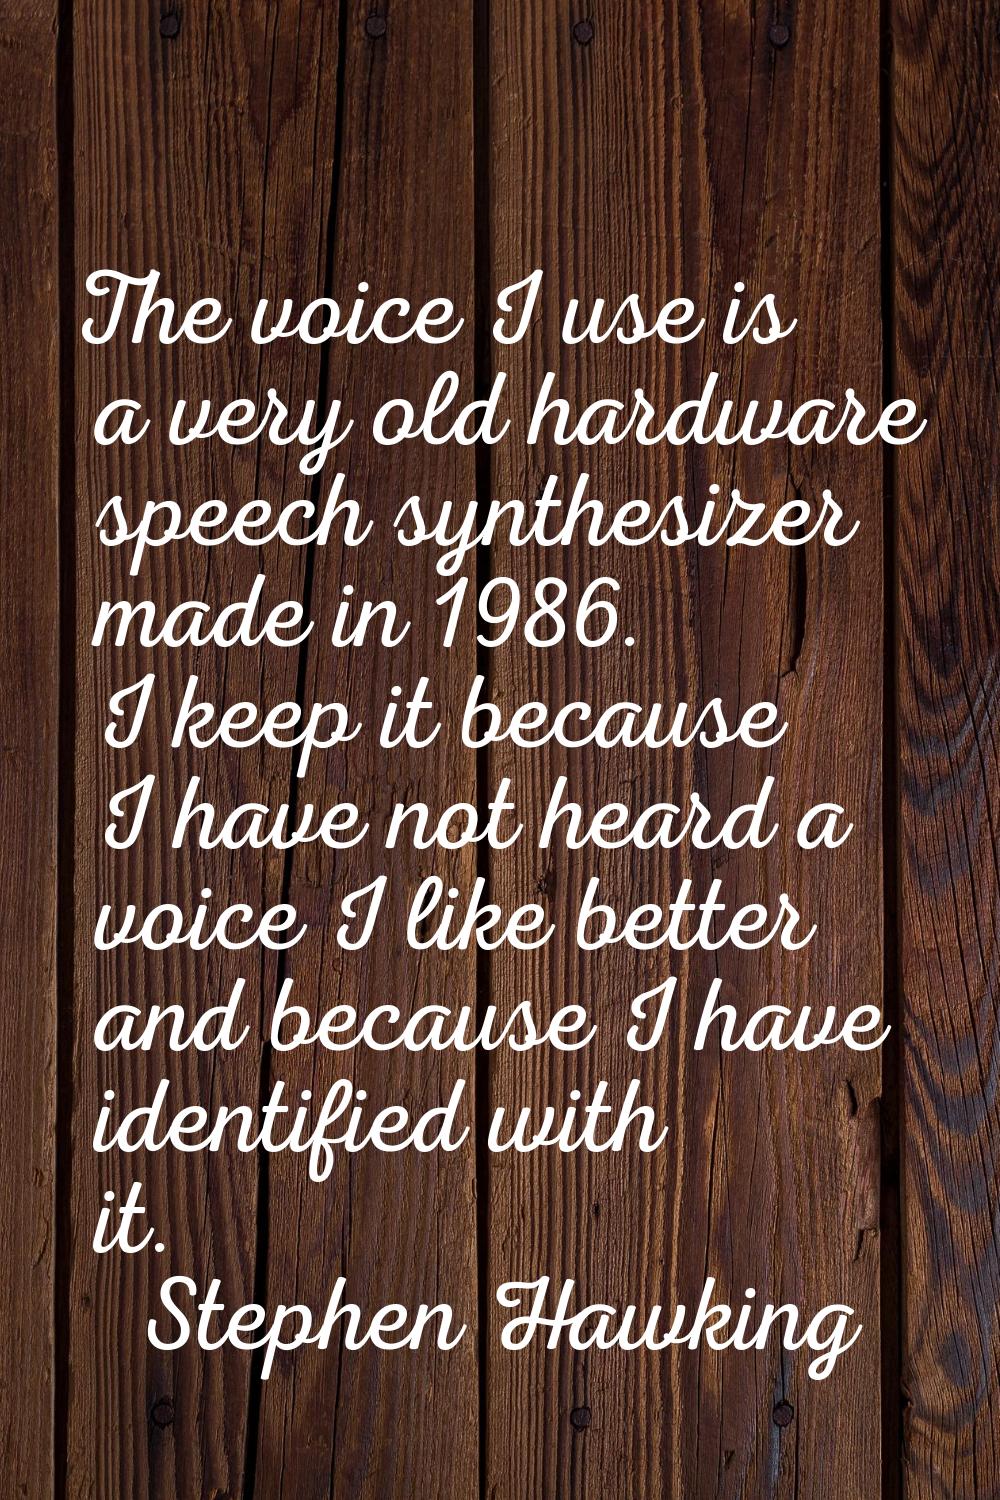 The voice I use is a very old hardware speech synthesizer made in 1986. I keep it because I have no